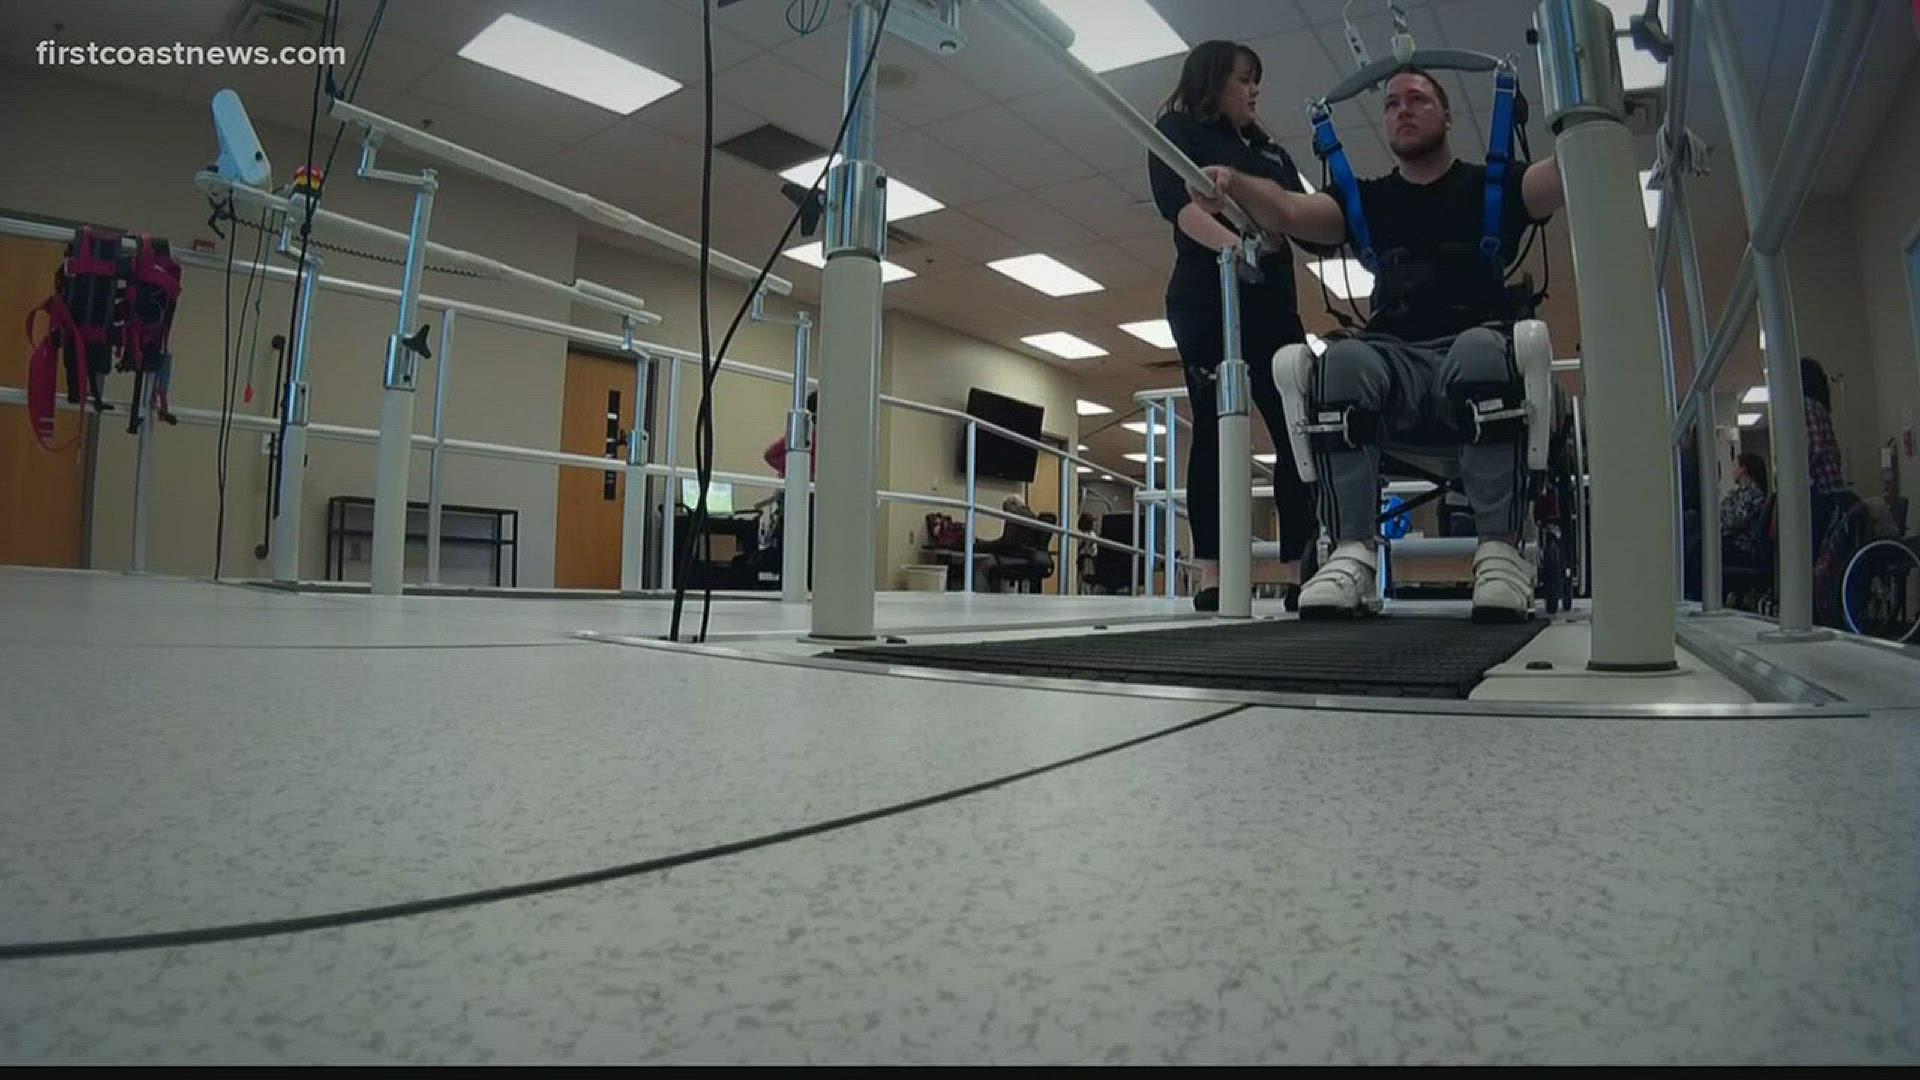 A new robotic treatment device helping people with spinal cord injuries learn to walk again can only be found in one place in the United States: Brooks Rehabilitation in Jacksonville.